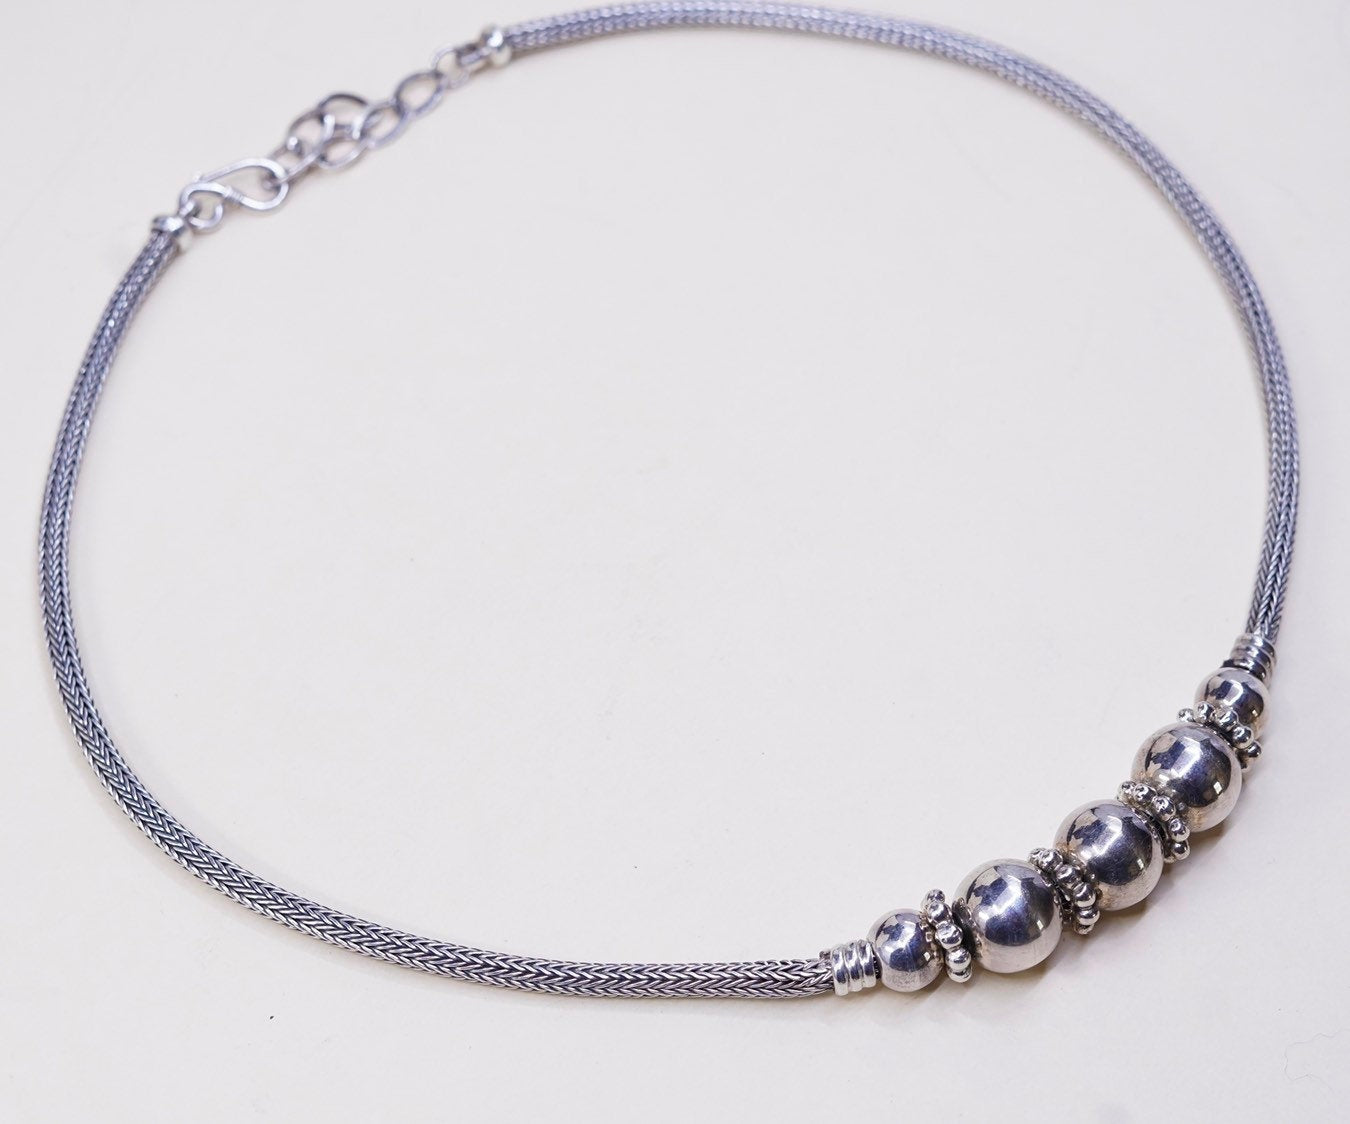 17", 5mm, sterling silver wheat link chain , beads pendant, 925 necklace